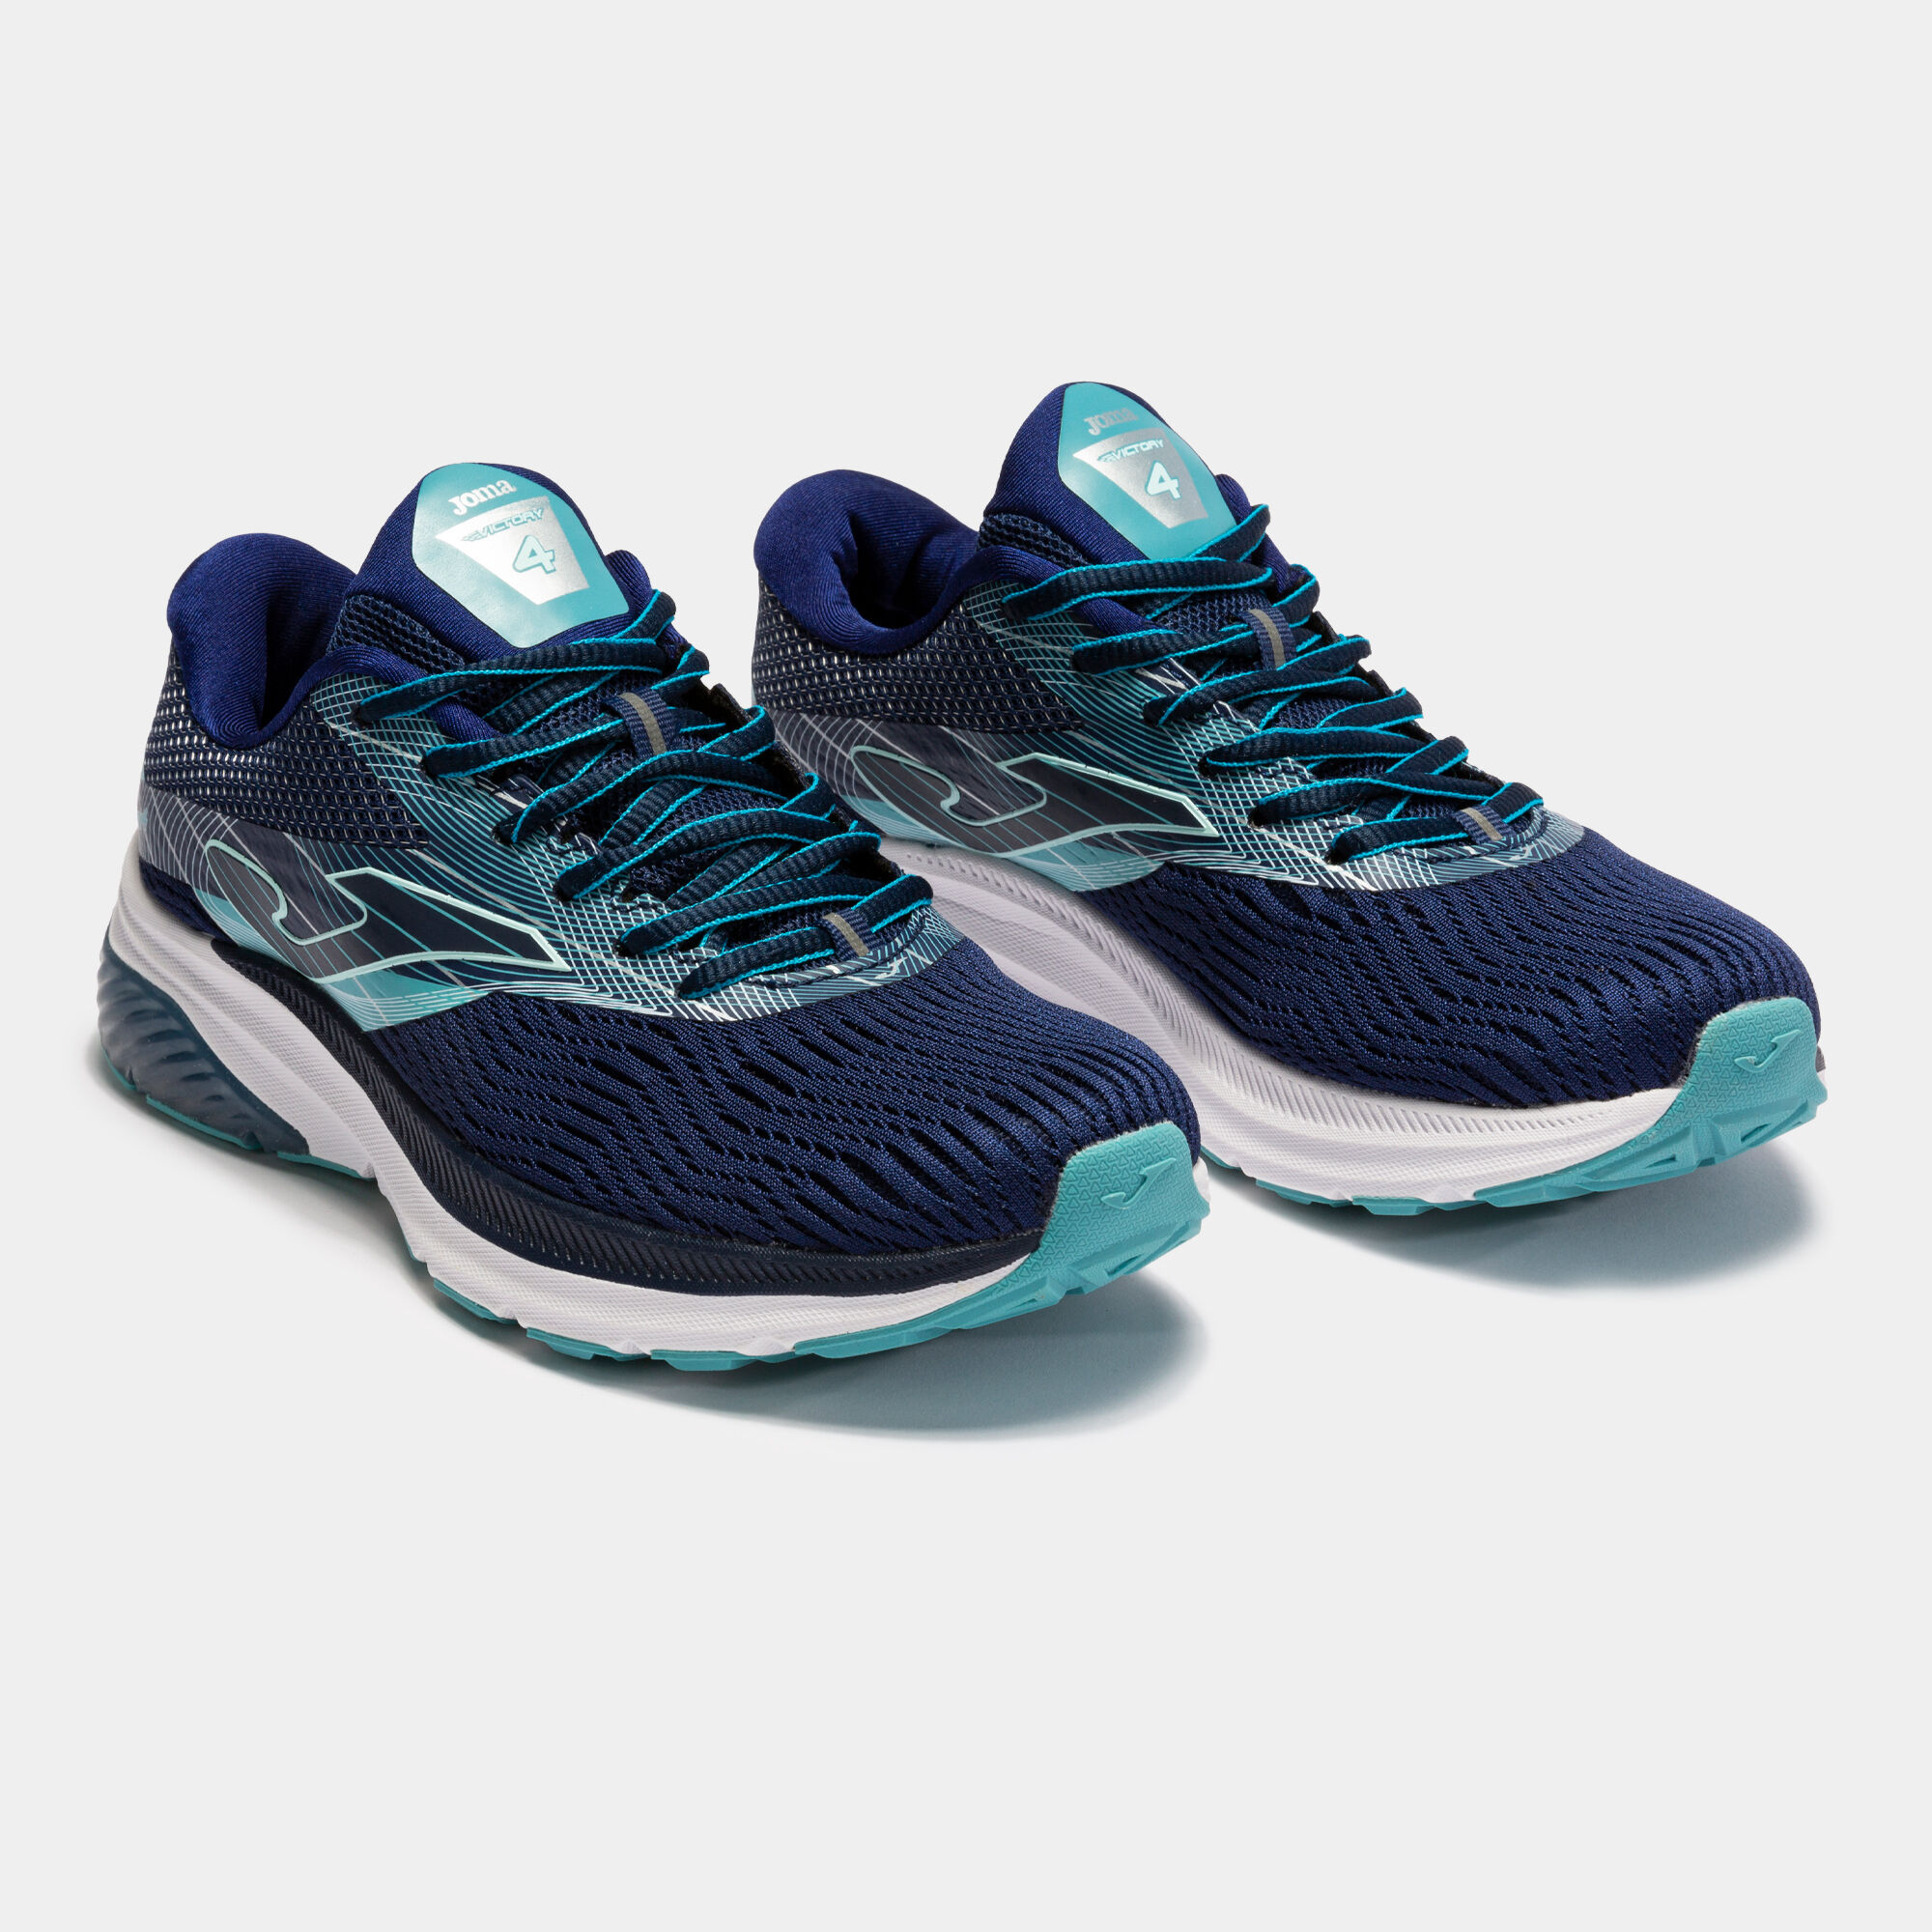 RUNNING SHOES VICTORY 22 WOMAN NAVY BLUE SKY BLUE